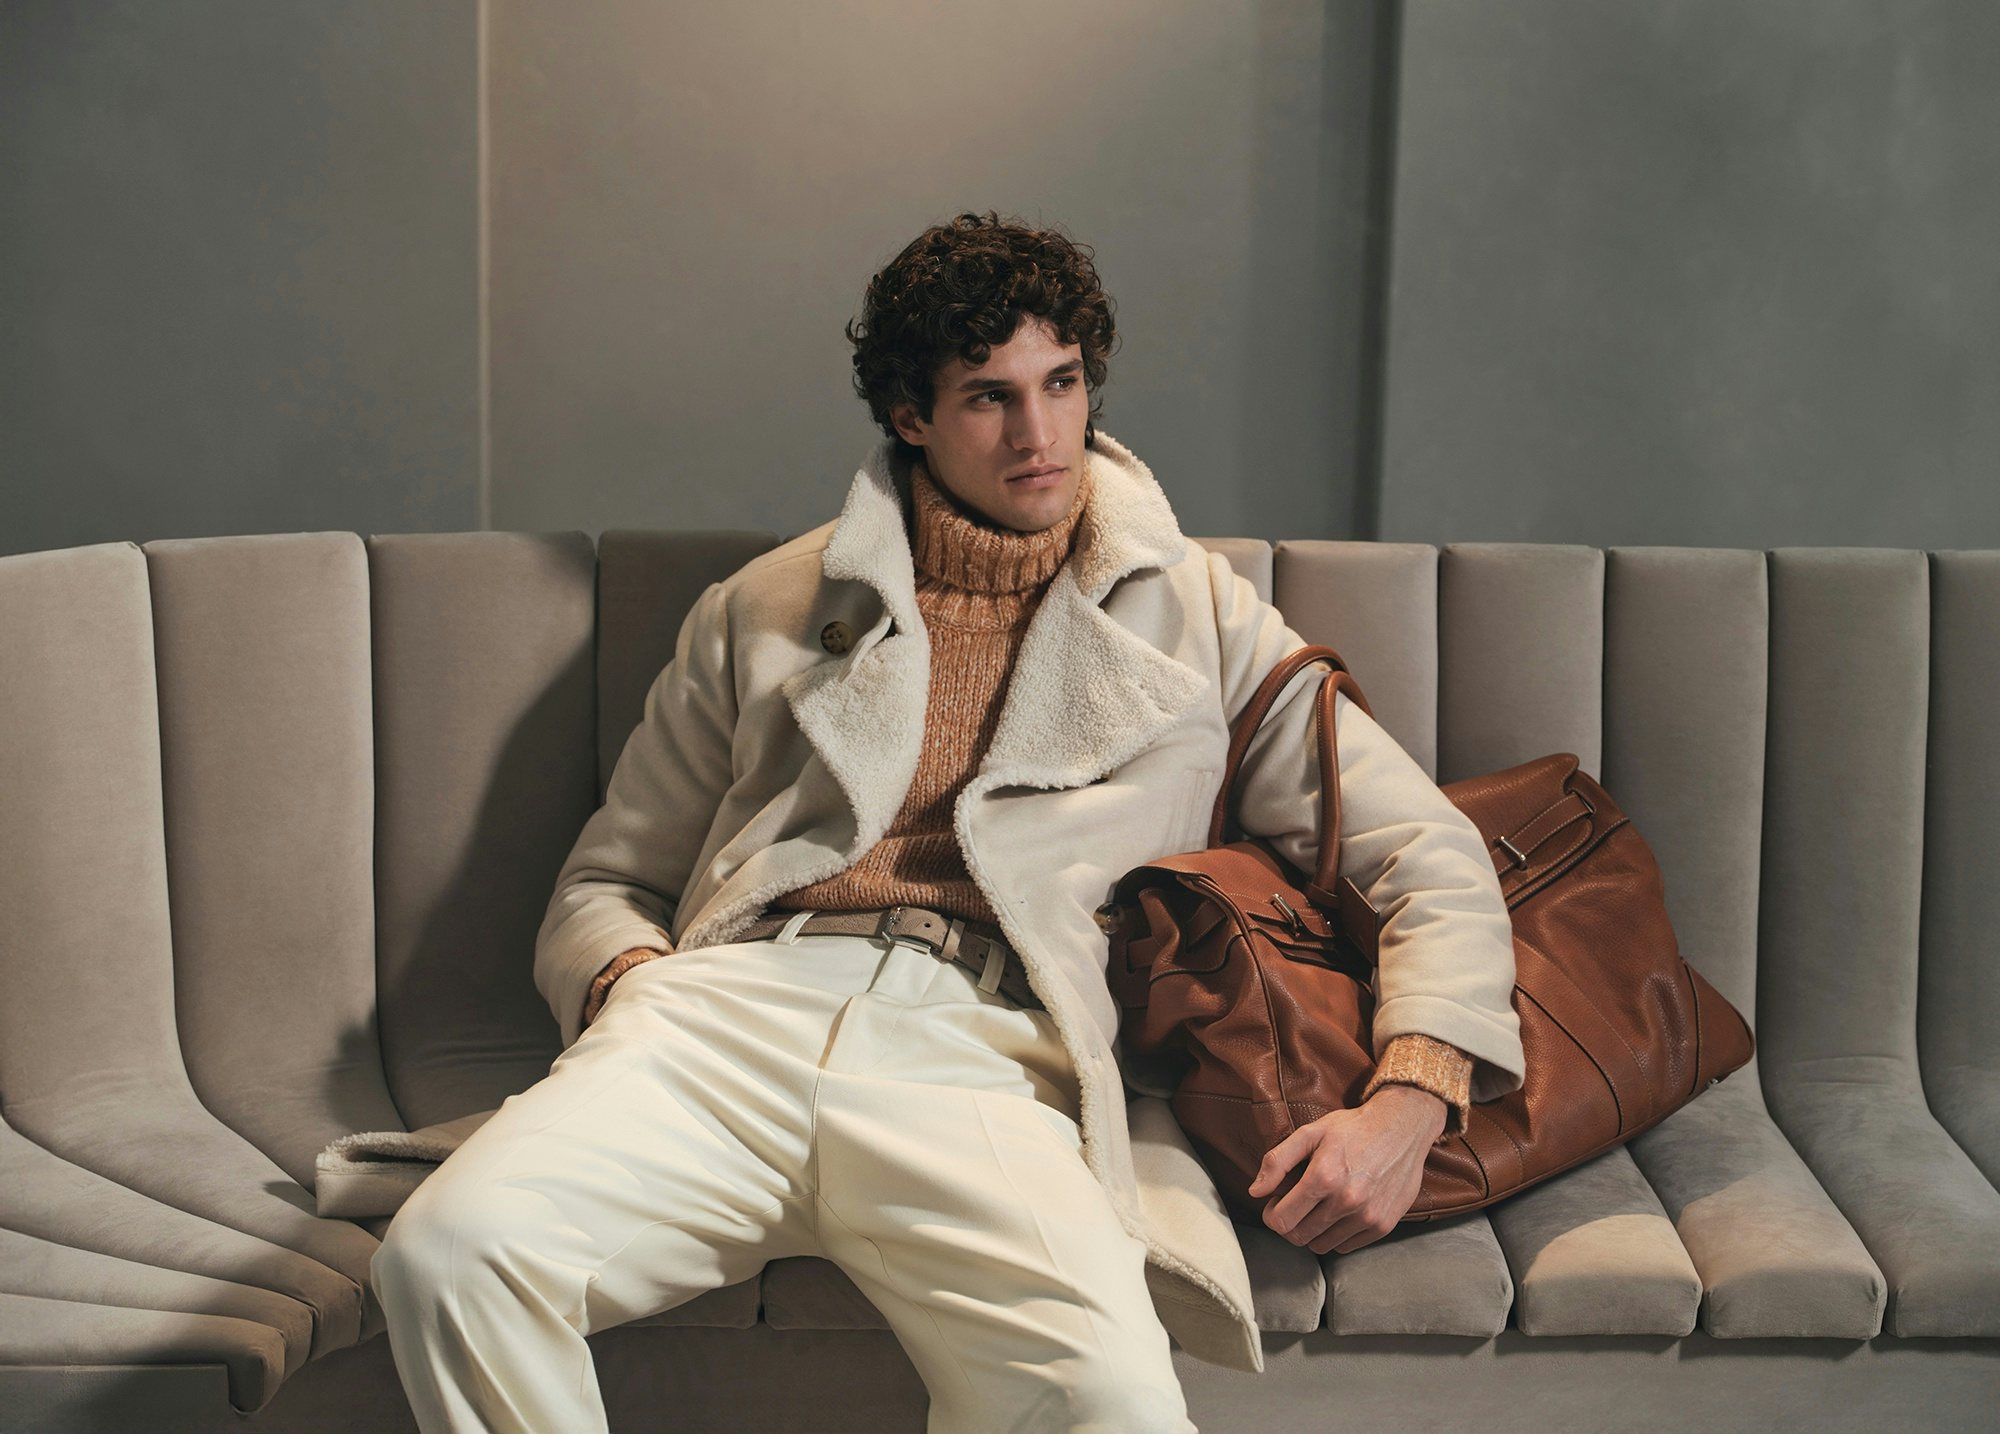 For the Fall/Winter 2024 collection, Brunello Cucinelli shifts to more daily casual looks to address its increasingly younger clientele. Image: Courtesy of Brunello Cucinelli